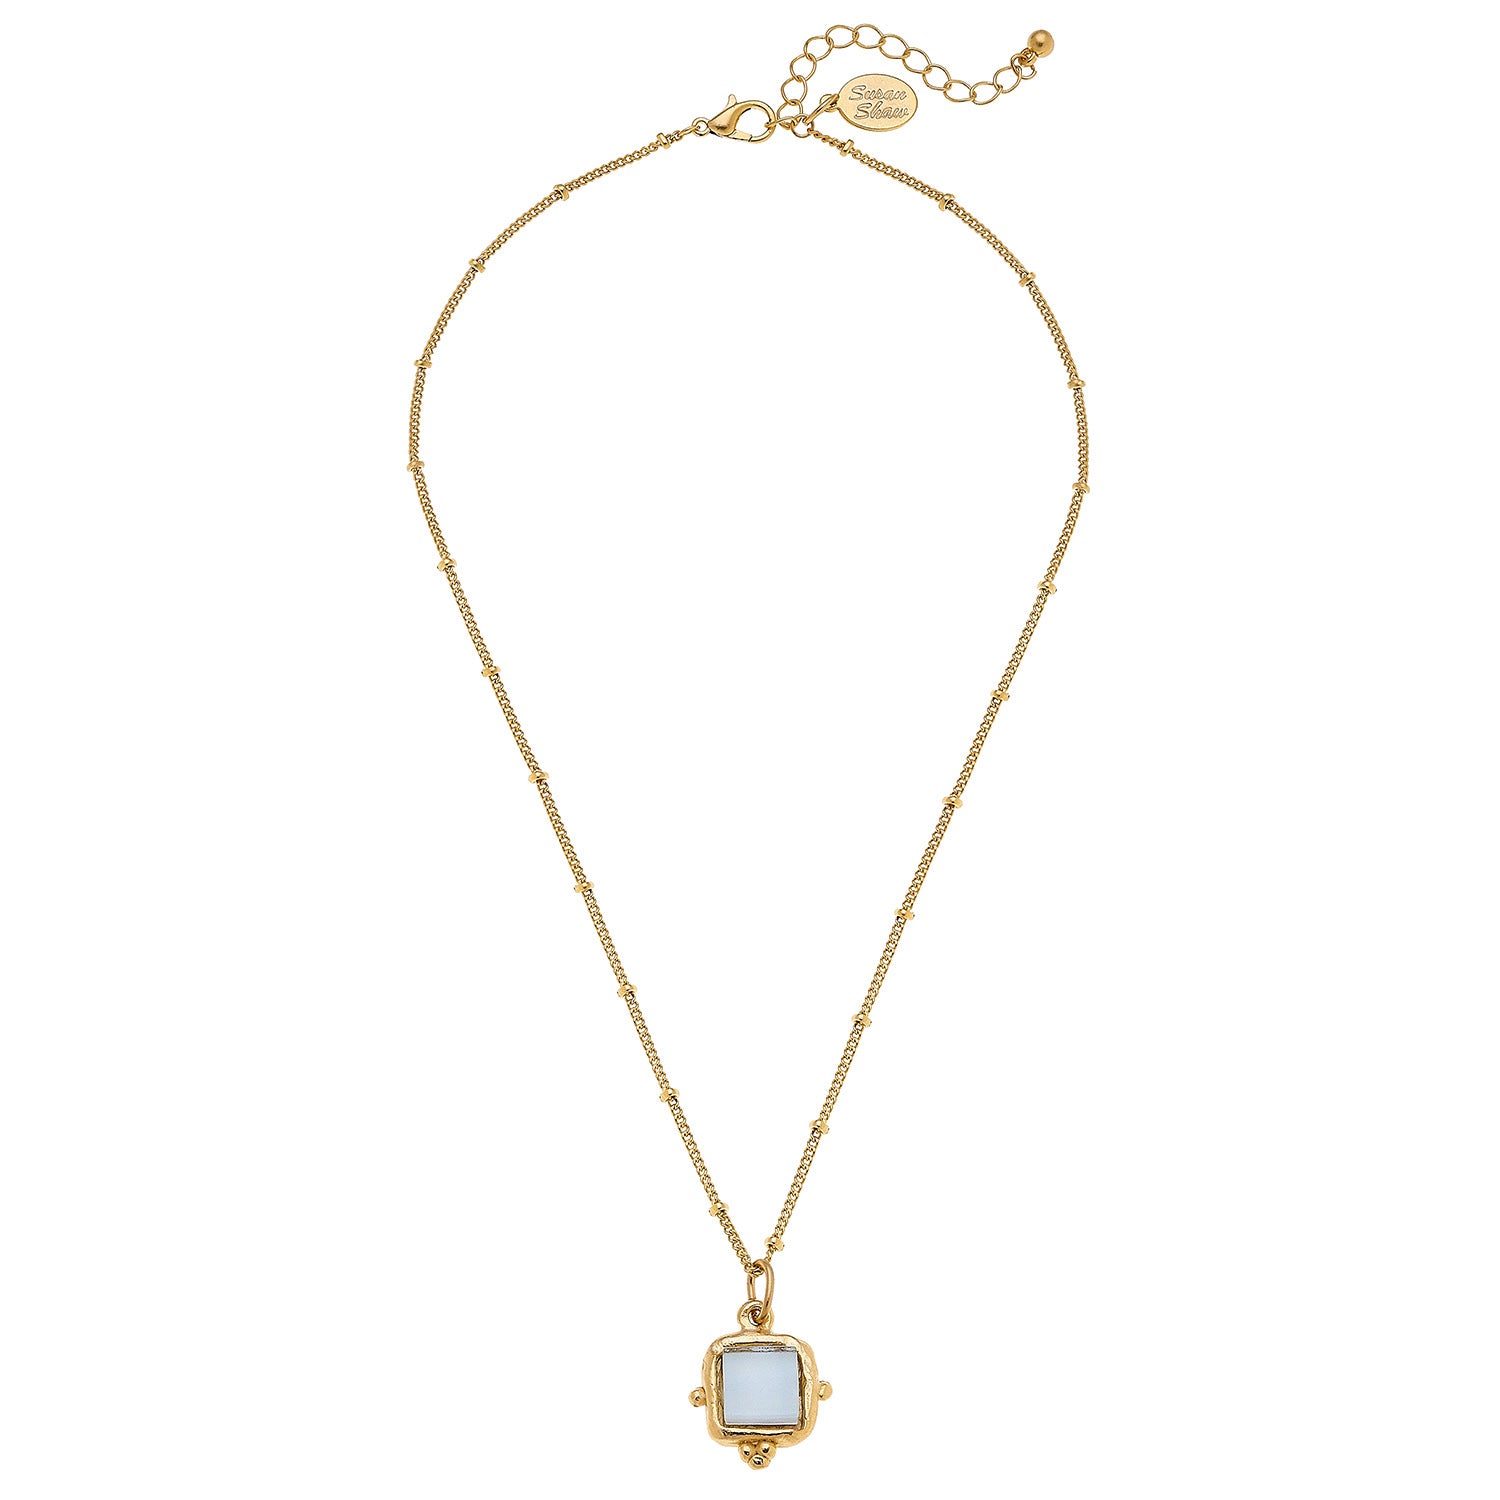 Susan Shaw Gold Plated Crystal Square Pendant Necklace